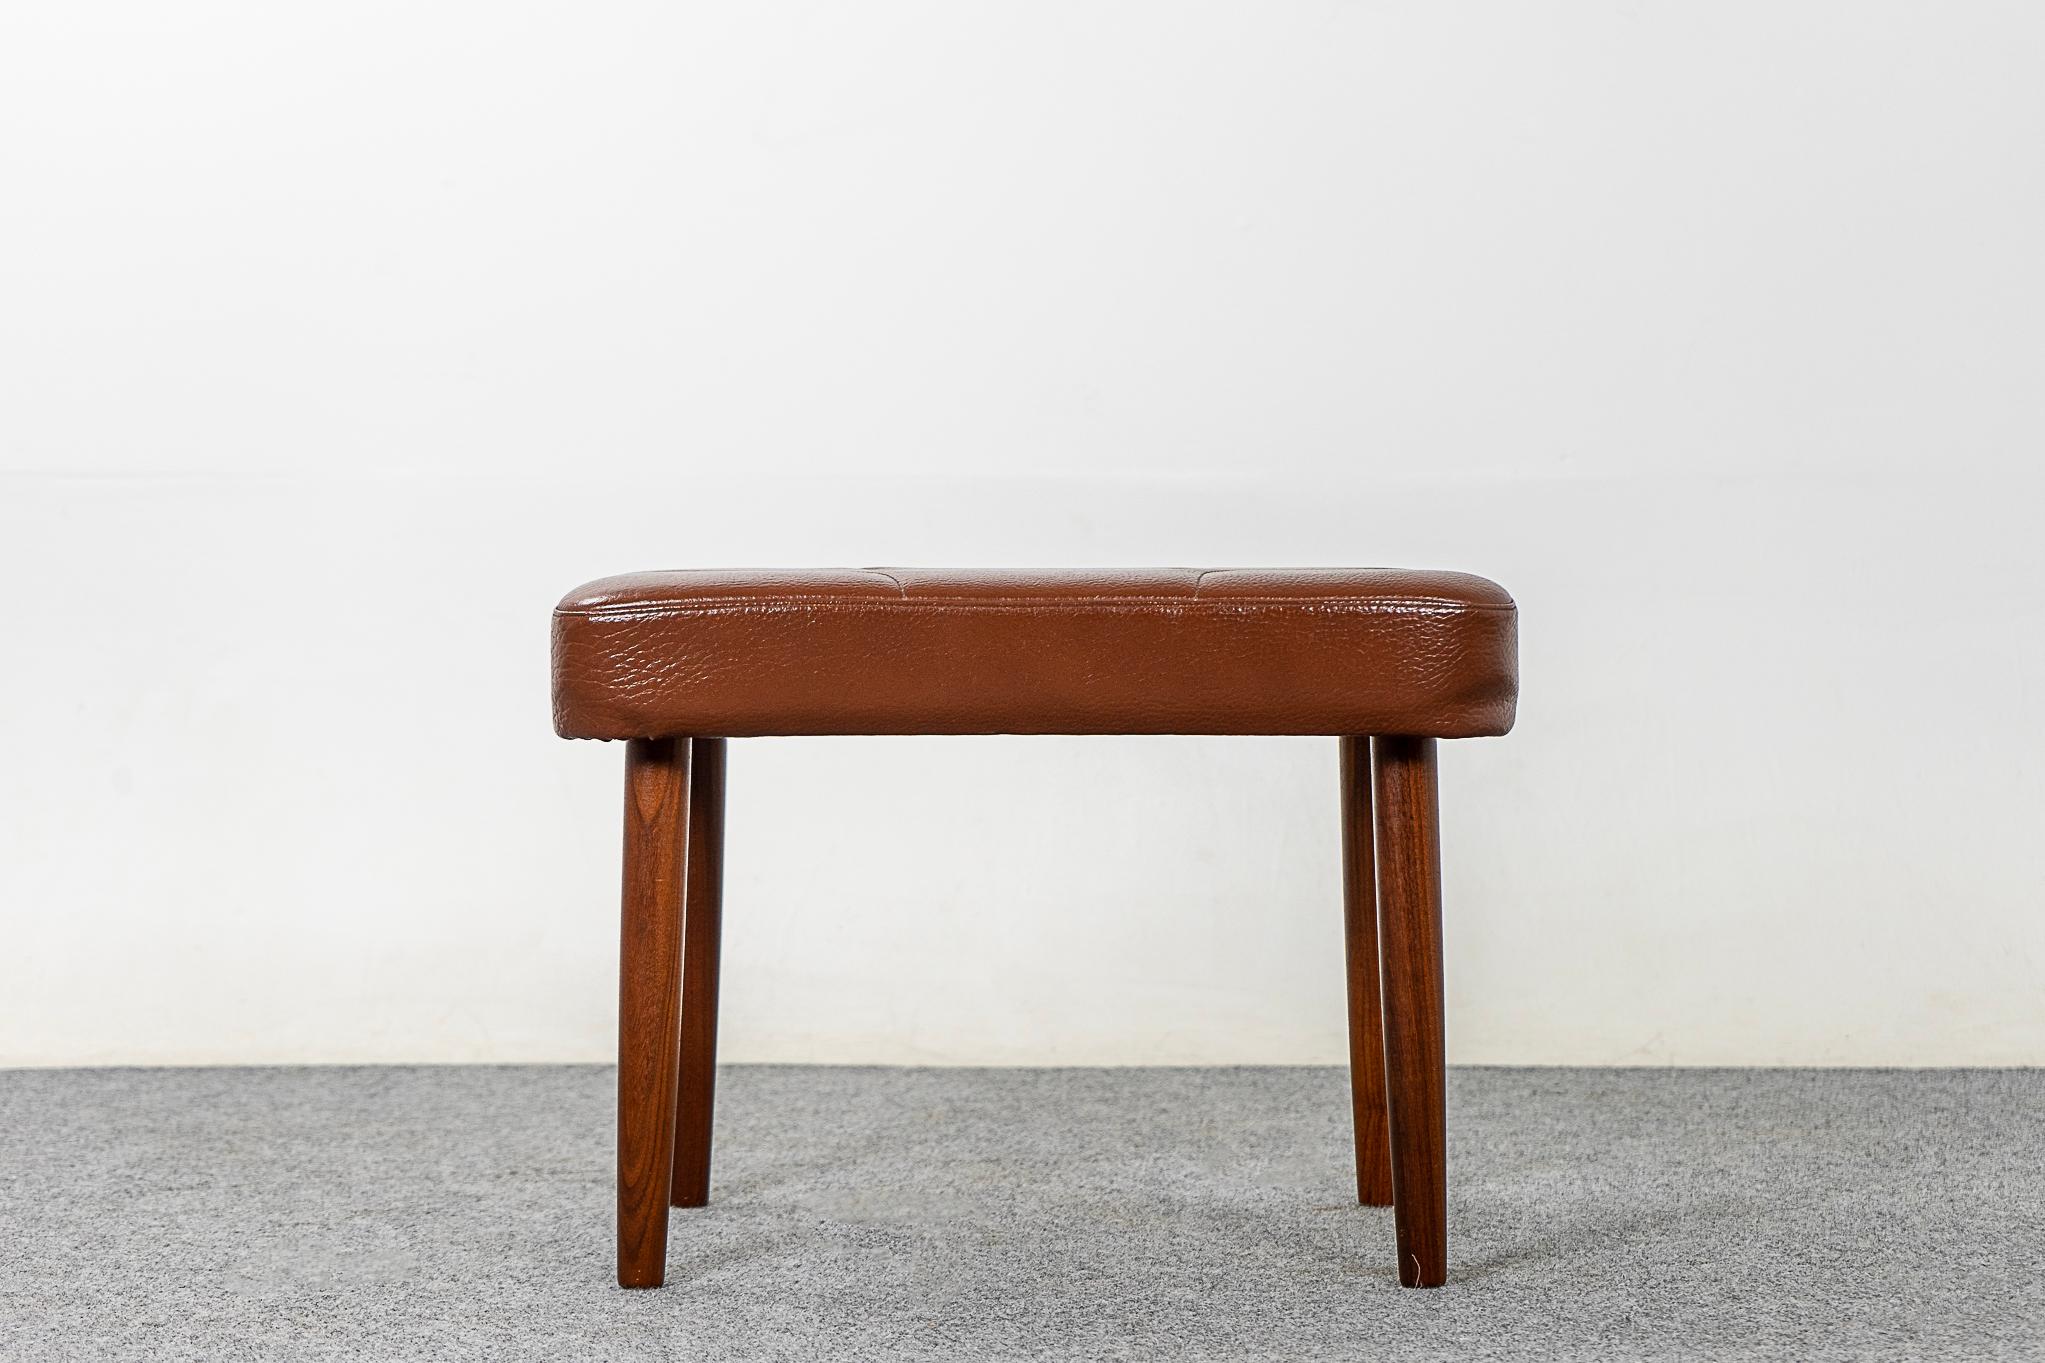 Teak & vinyl Danish footstool, circa 1960's. Charming quilted motif on caramel colored vinyl. Sleek conical legs that remove. Minor wear, typical of use and age.

Please inquire for international and remote shipping rates.